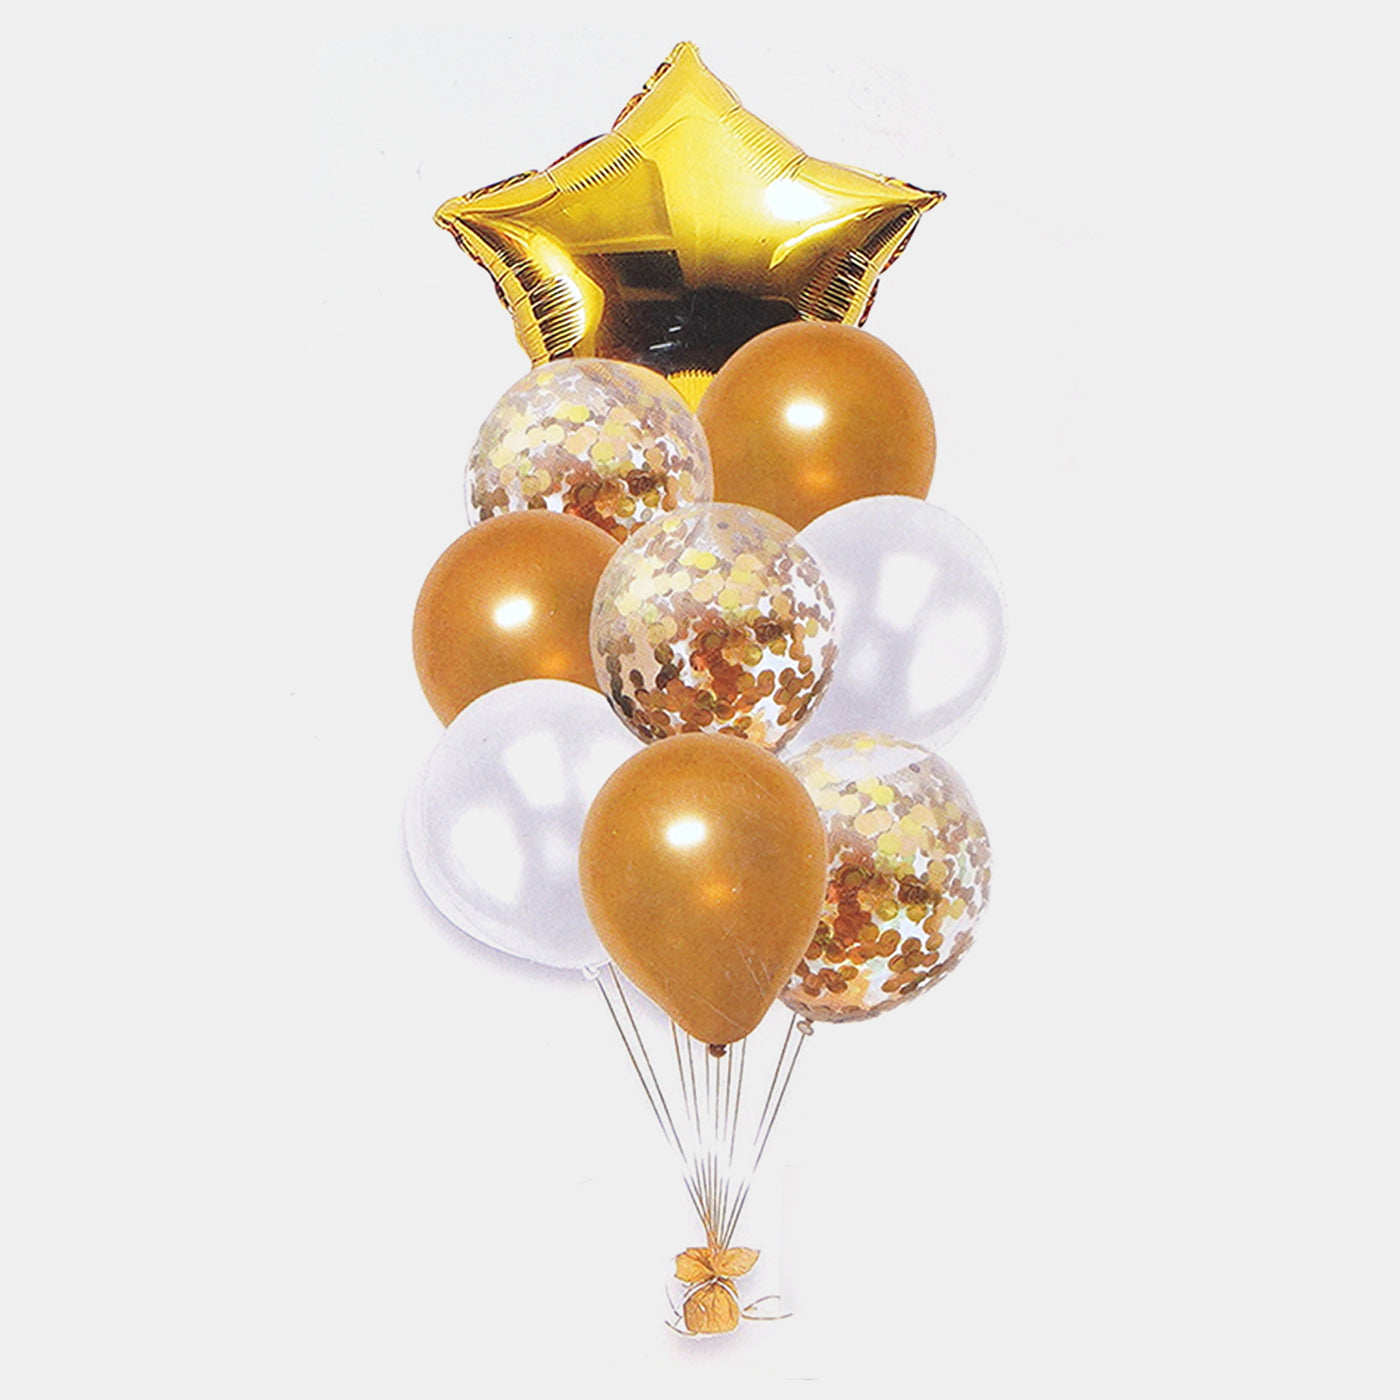 FOIL MIX BALLOON BIRTHDAY PARTY DECORATION 9PCS/PACK